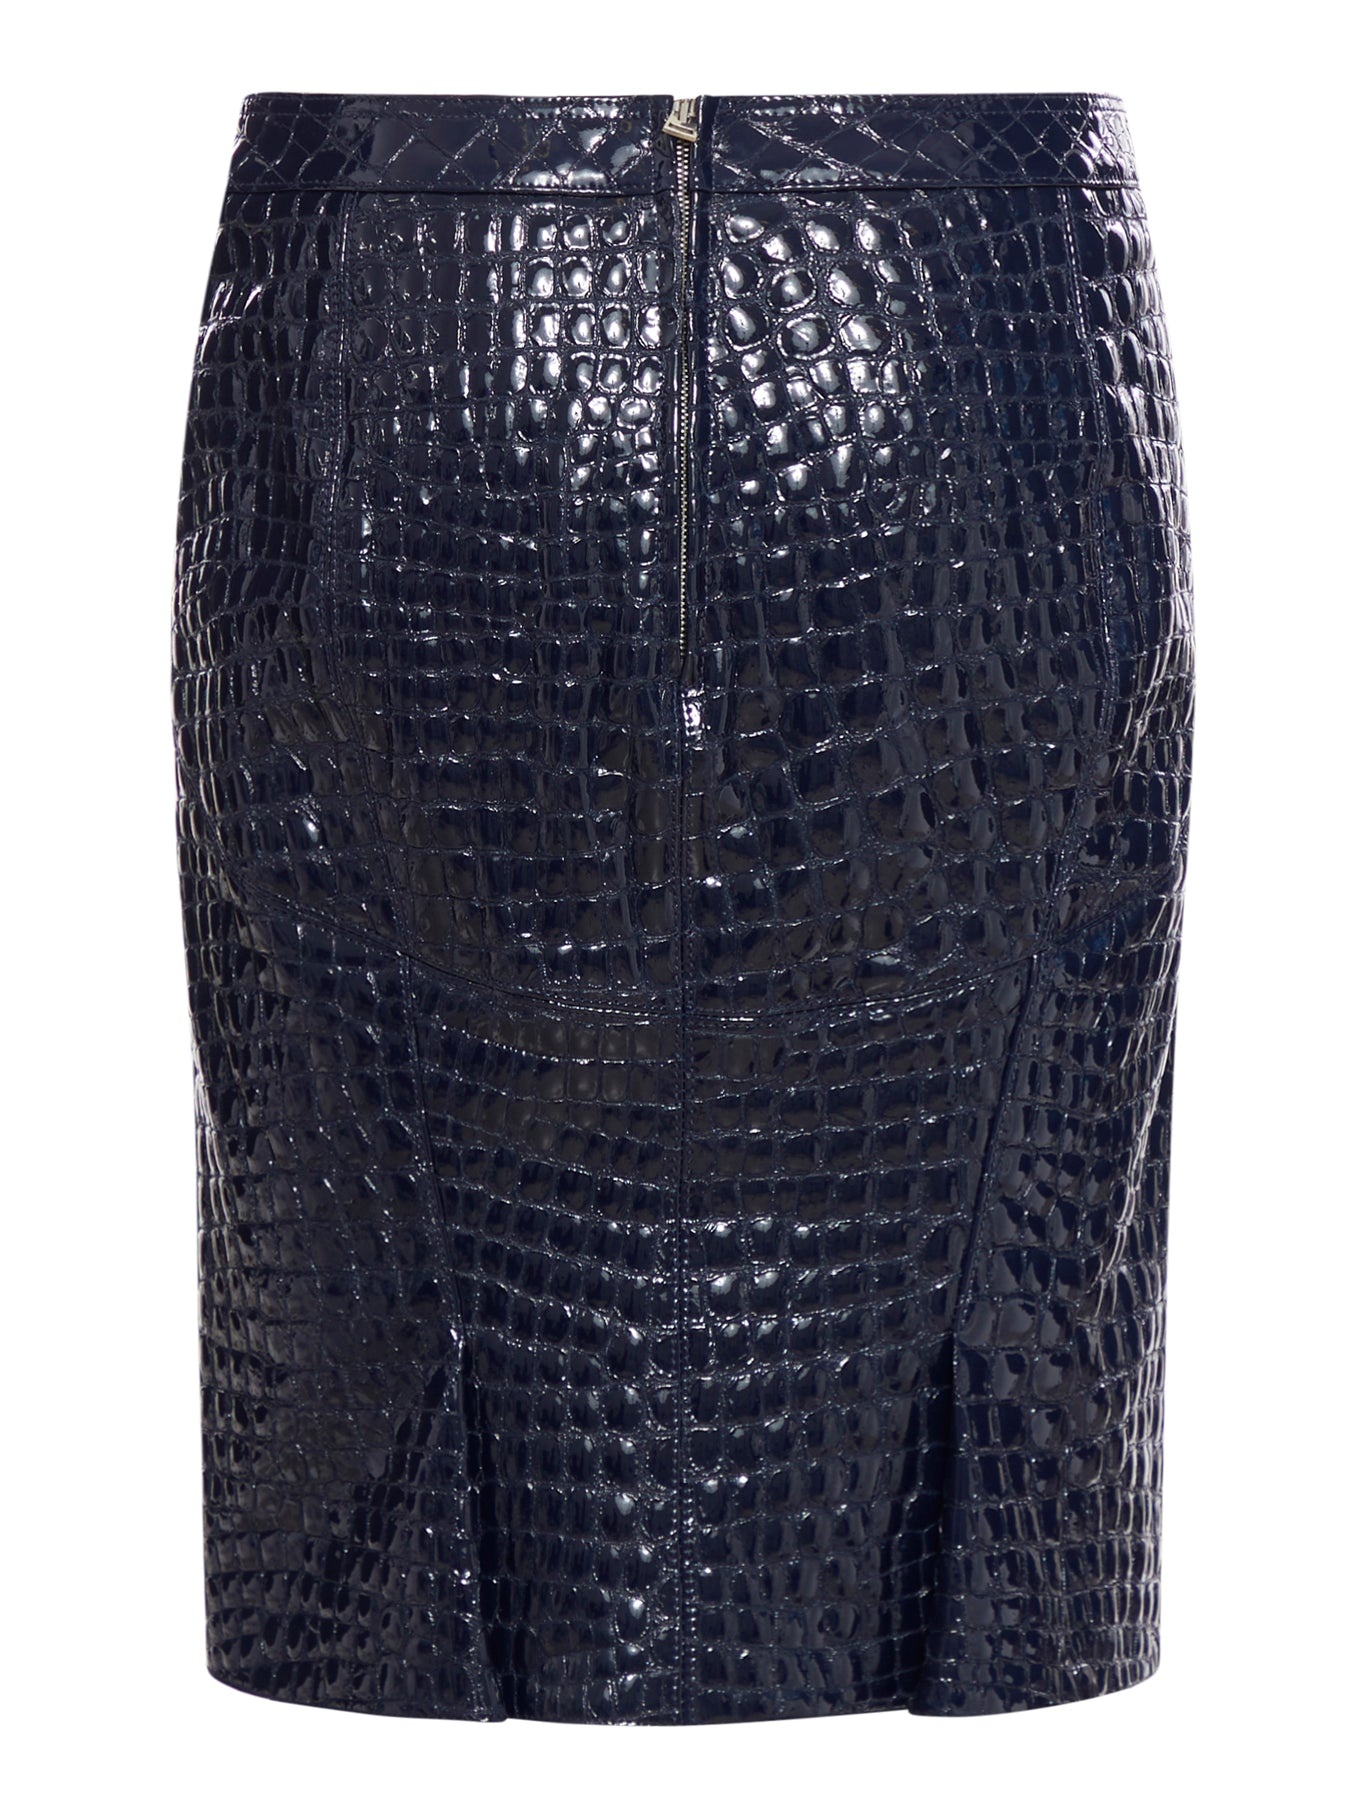 GLOSSY CROCO EMBOSSED GOAT LEATHER SKIRT - 2